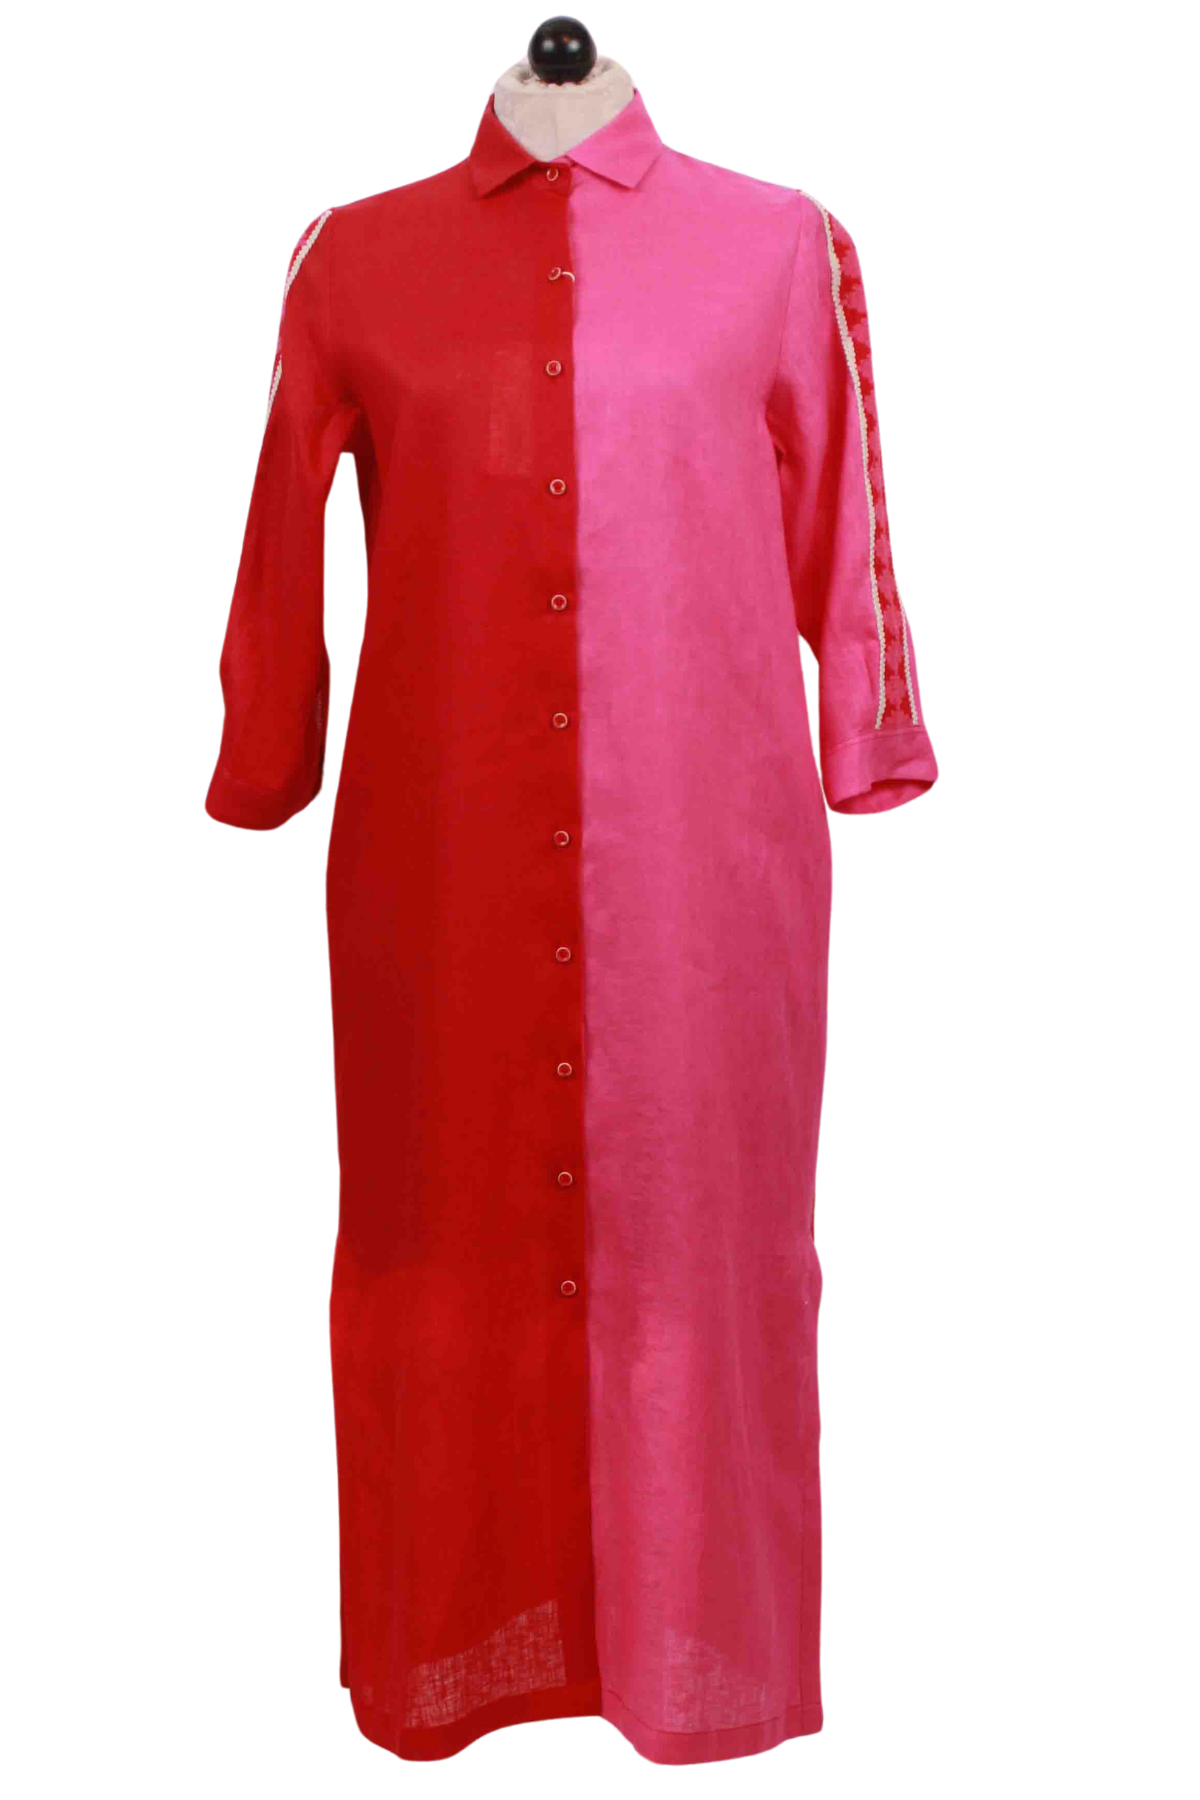 Antonella Red Linen Dress by Vilagallo unbelted